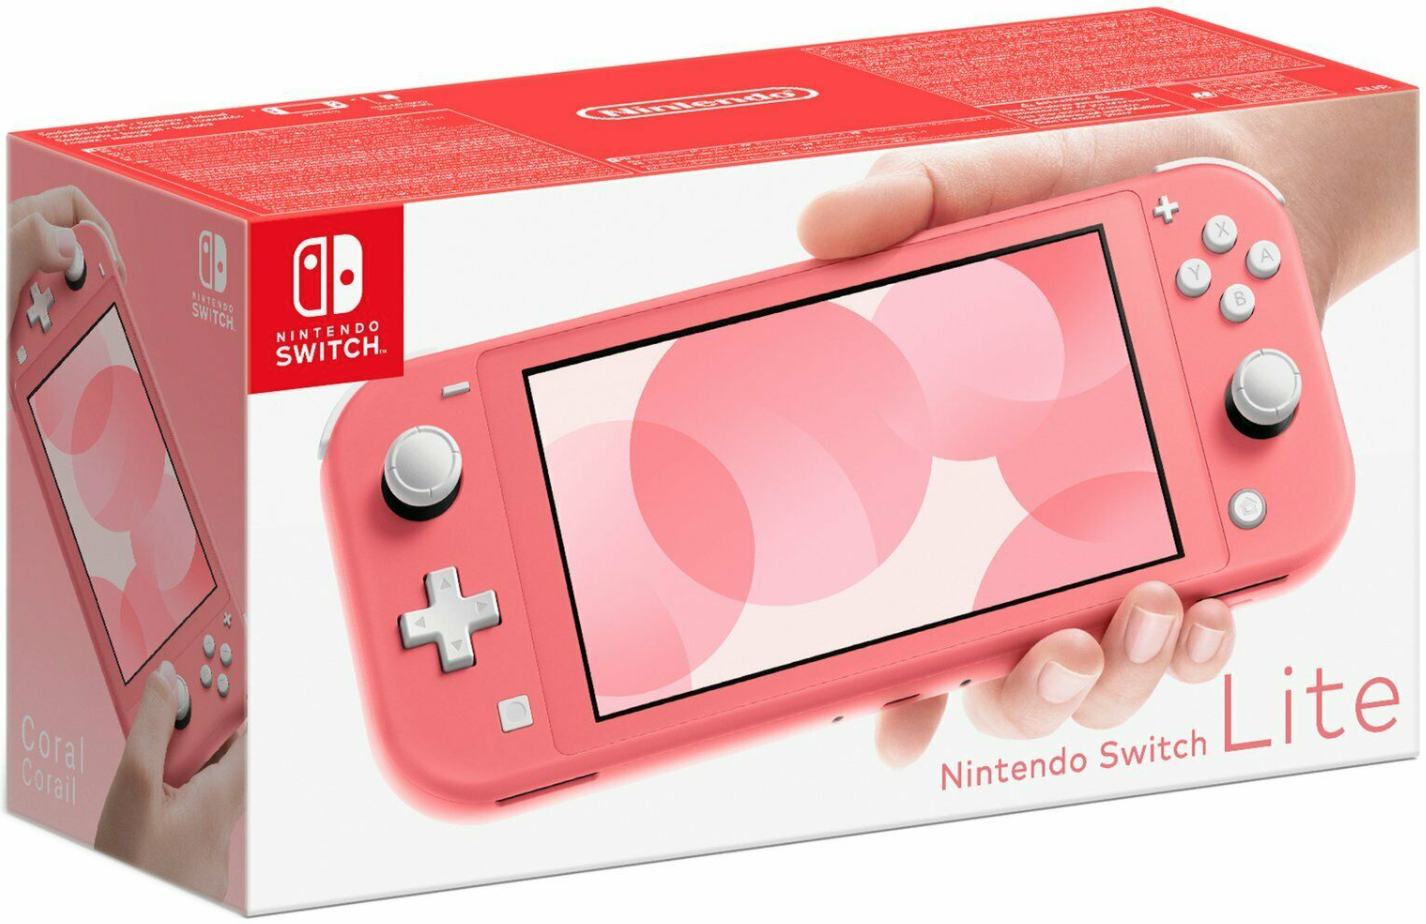 Nintendo Switch Lite 5.5 Inch Touchscreen Handheld Console (Coral) A-Grade Refurb - £147.24